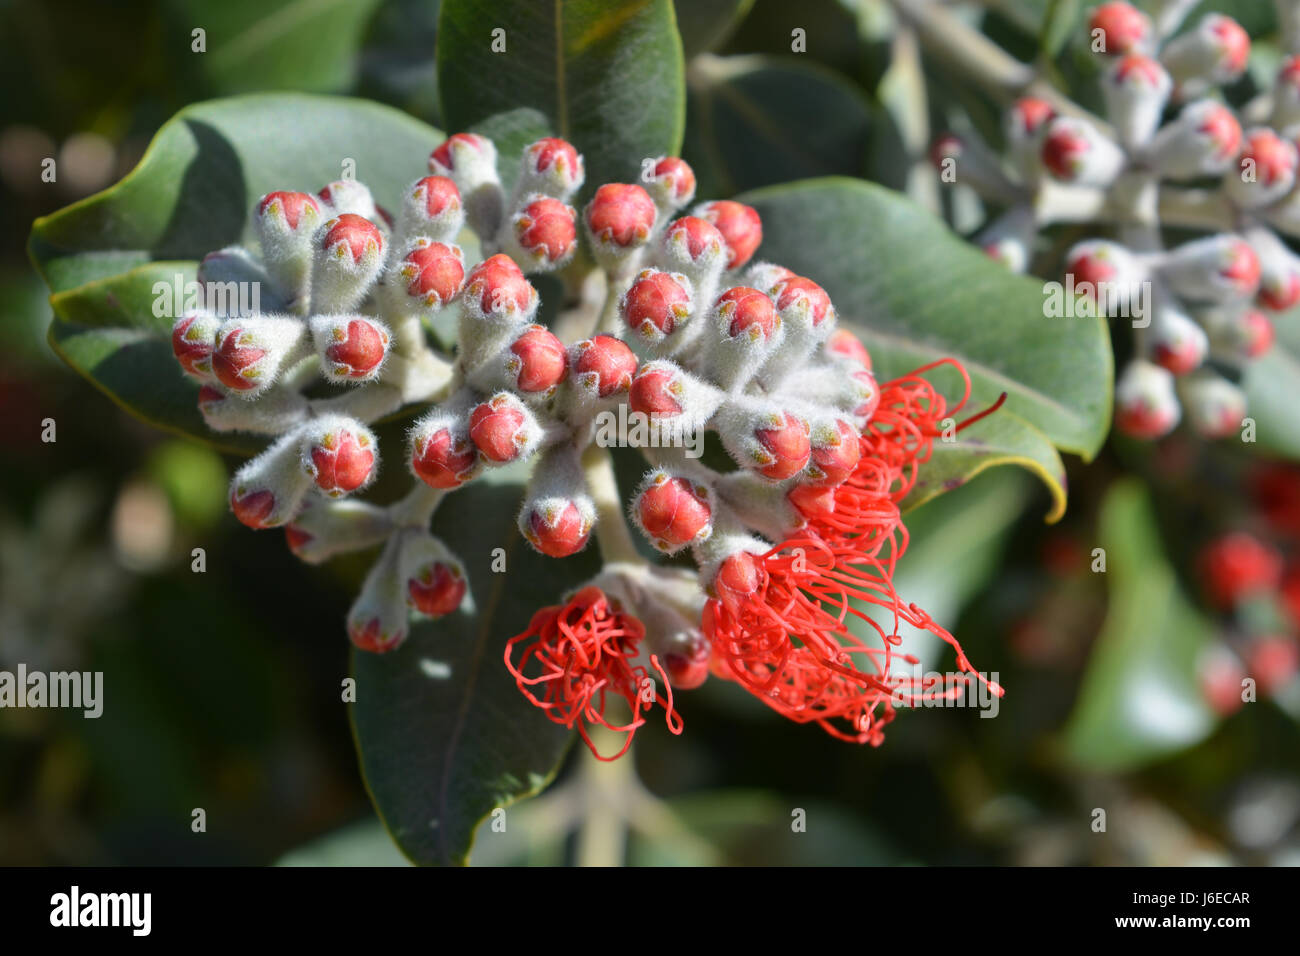 Grevillea, also known as spider flower, silky oak and toothbrush plant Stock Photo